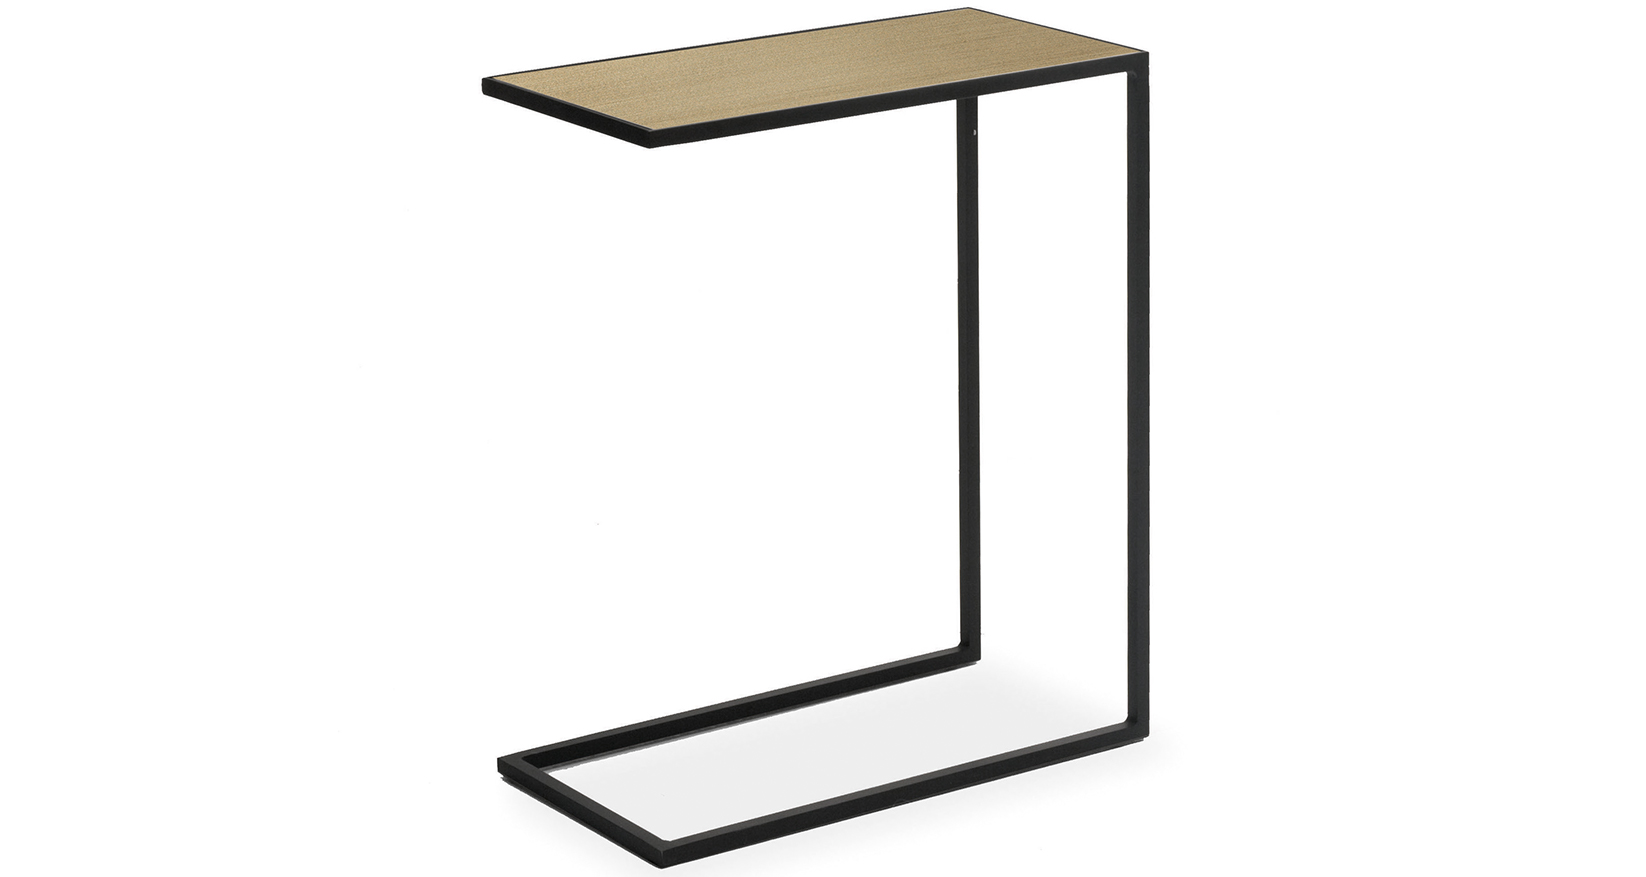 Narciso sofa side table “C” - Cantori